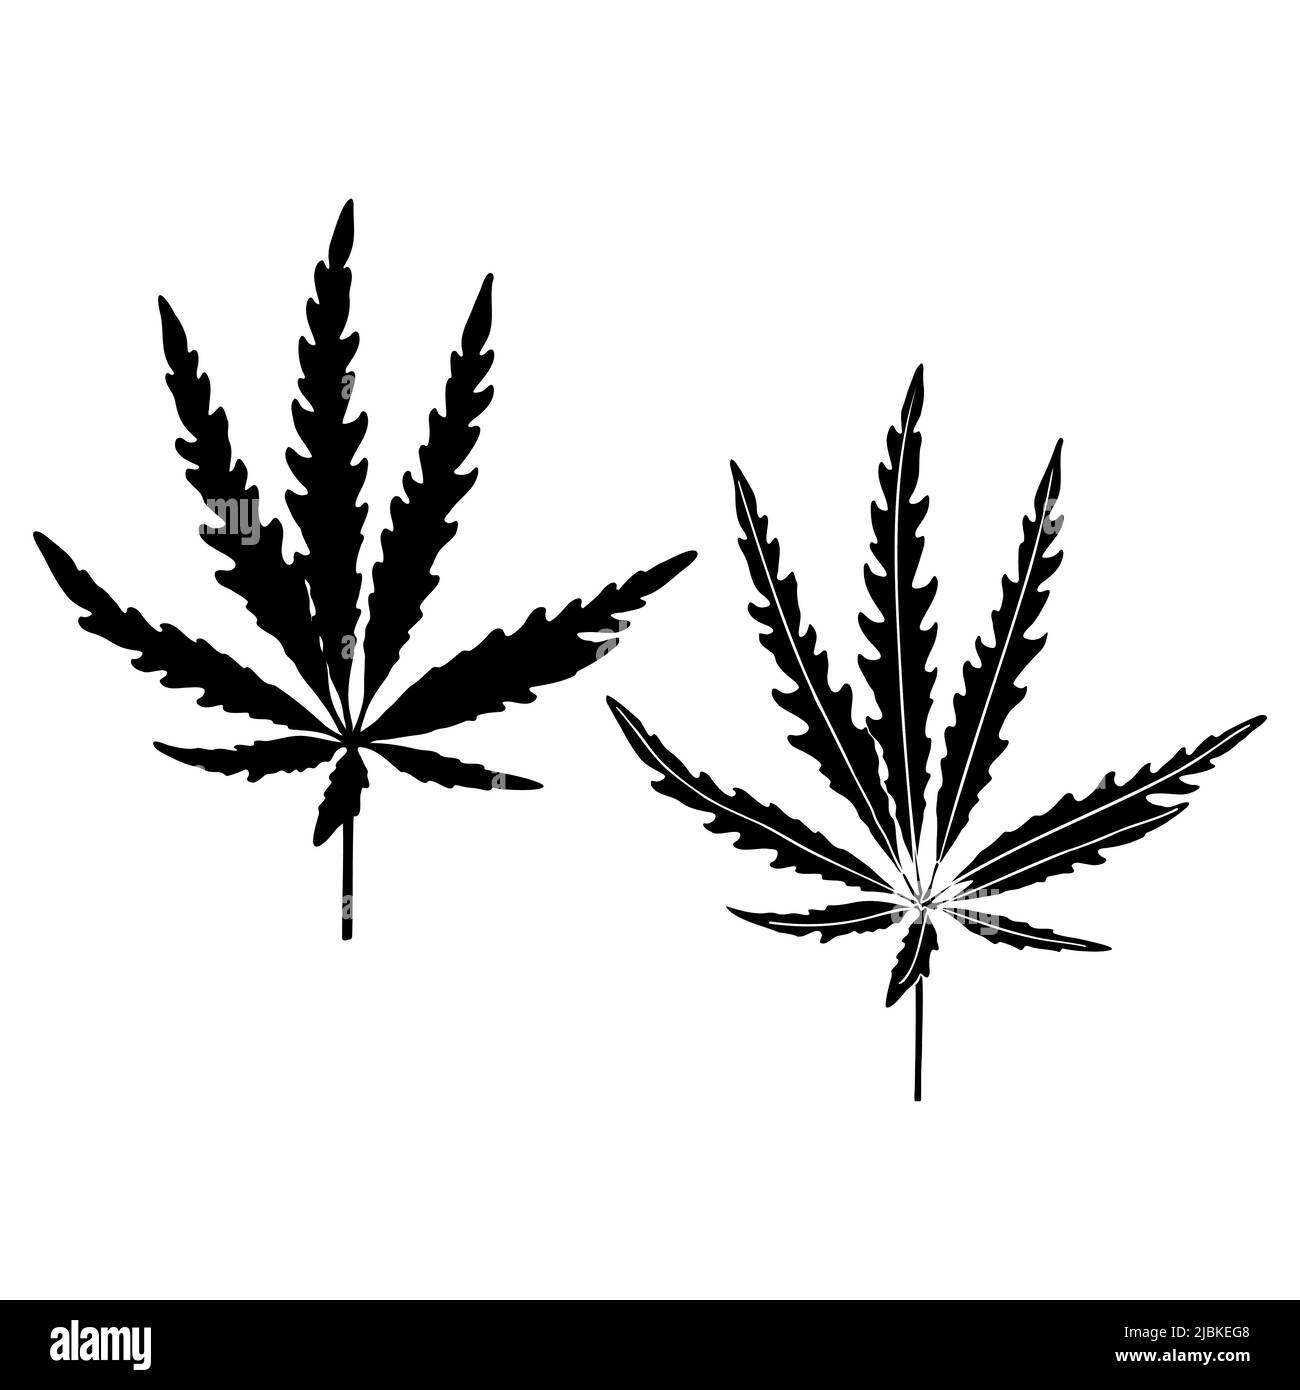 Marijuana or cannabis leaf silhouette isolated set. Black silhouette of marijuana leaf or herbal cannabis on white background. Vector illustration. Stock Vector